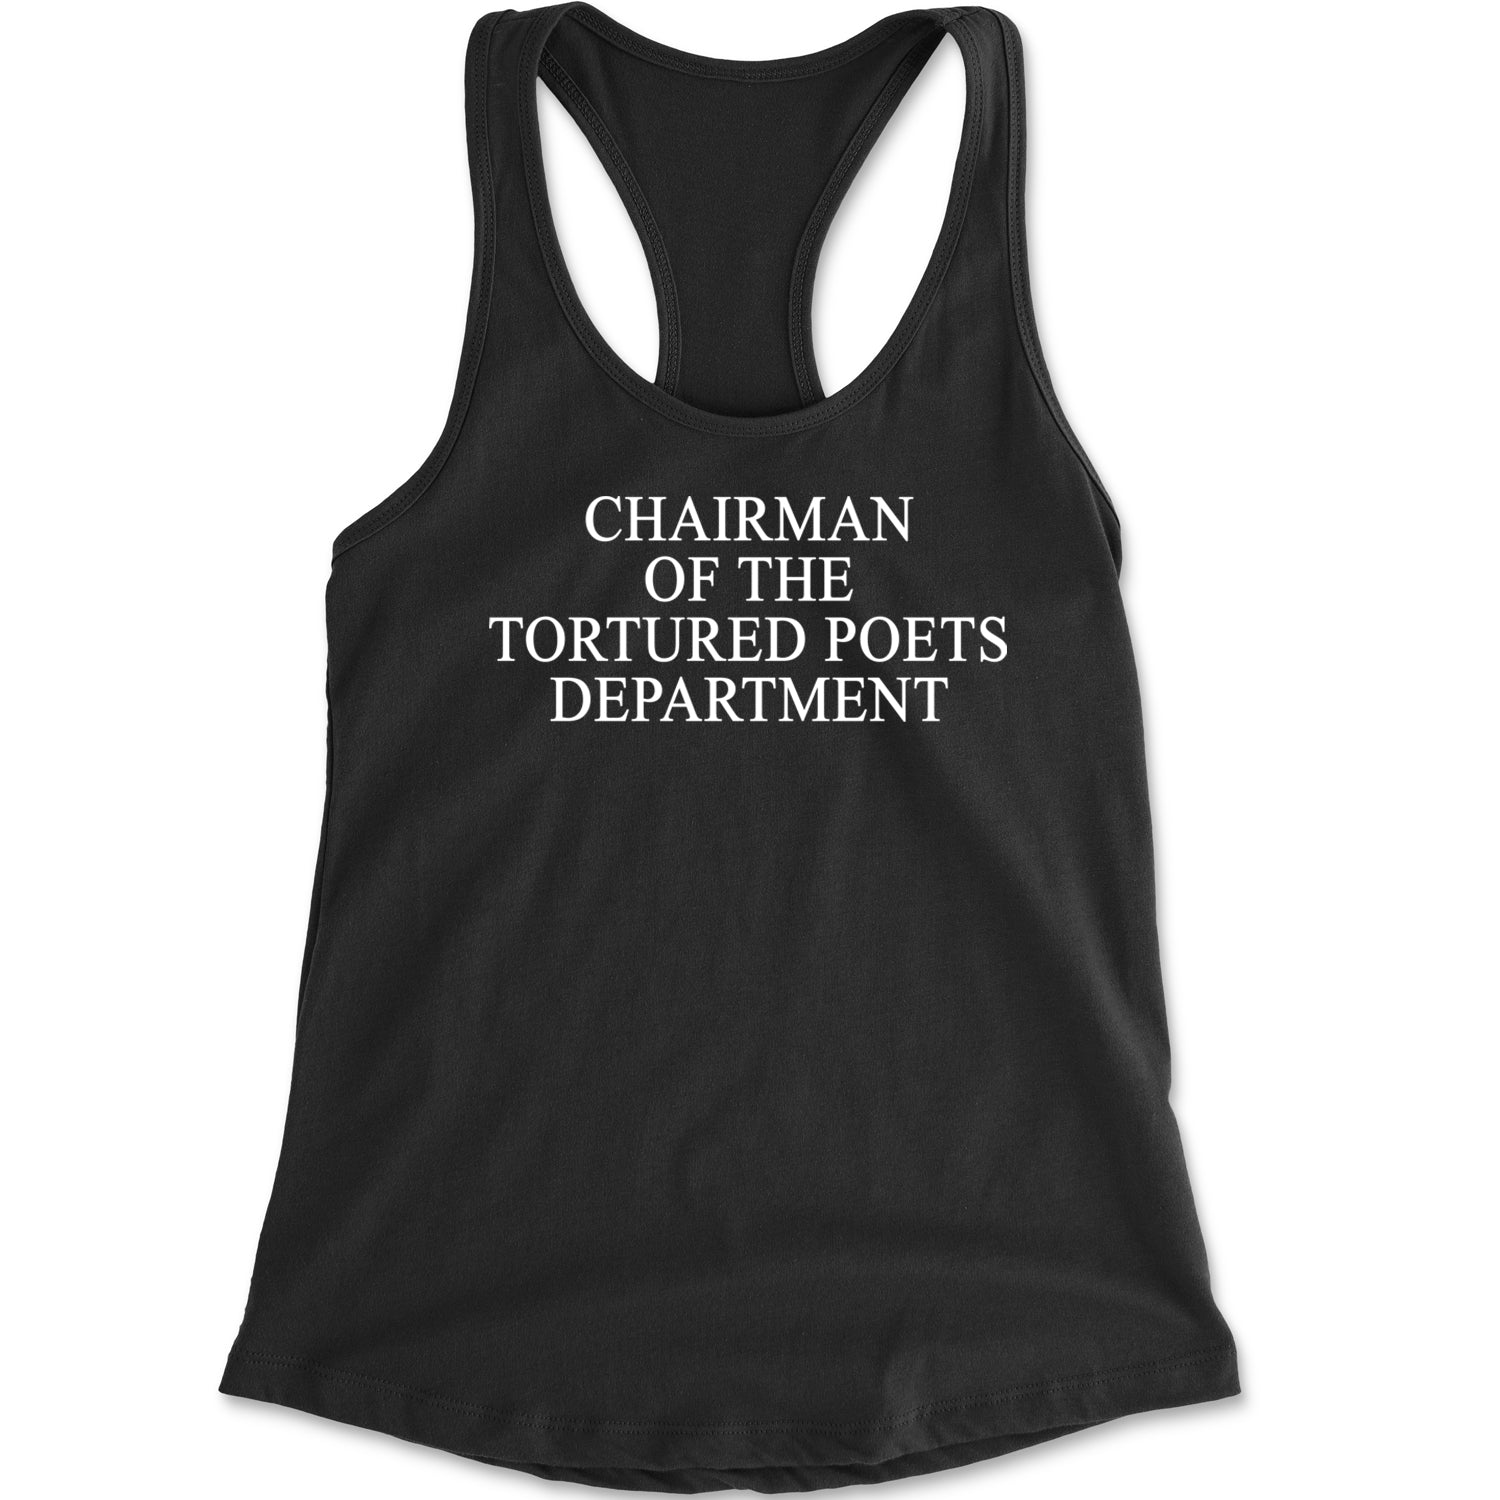 Chairman Of The Tortured Poets Department Racerback Tank Top for Women